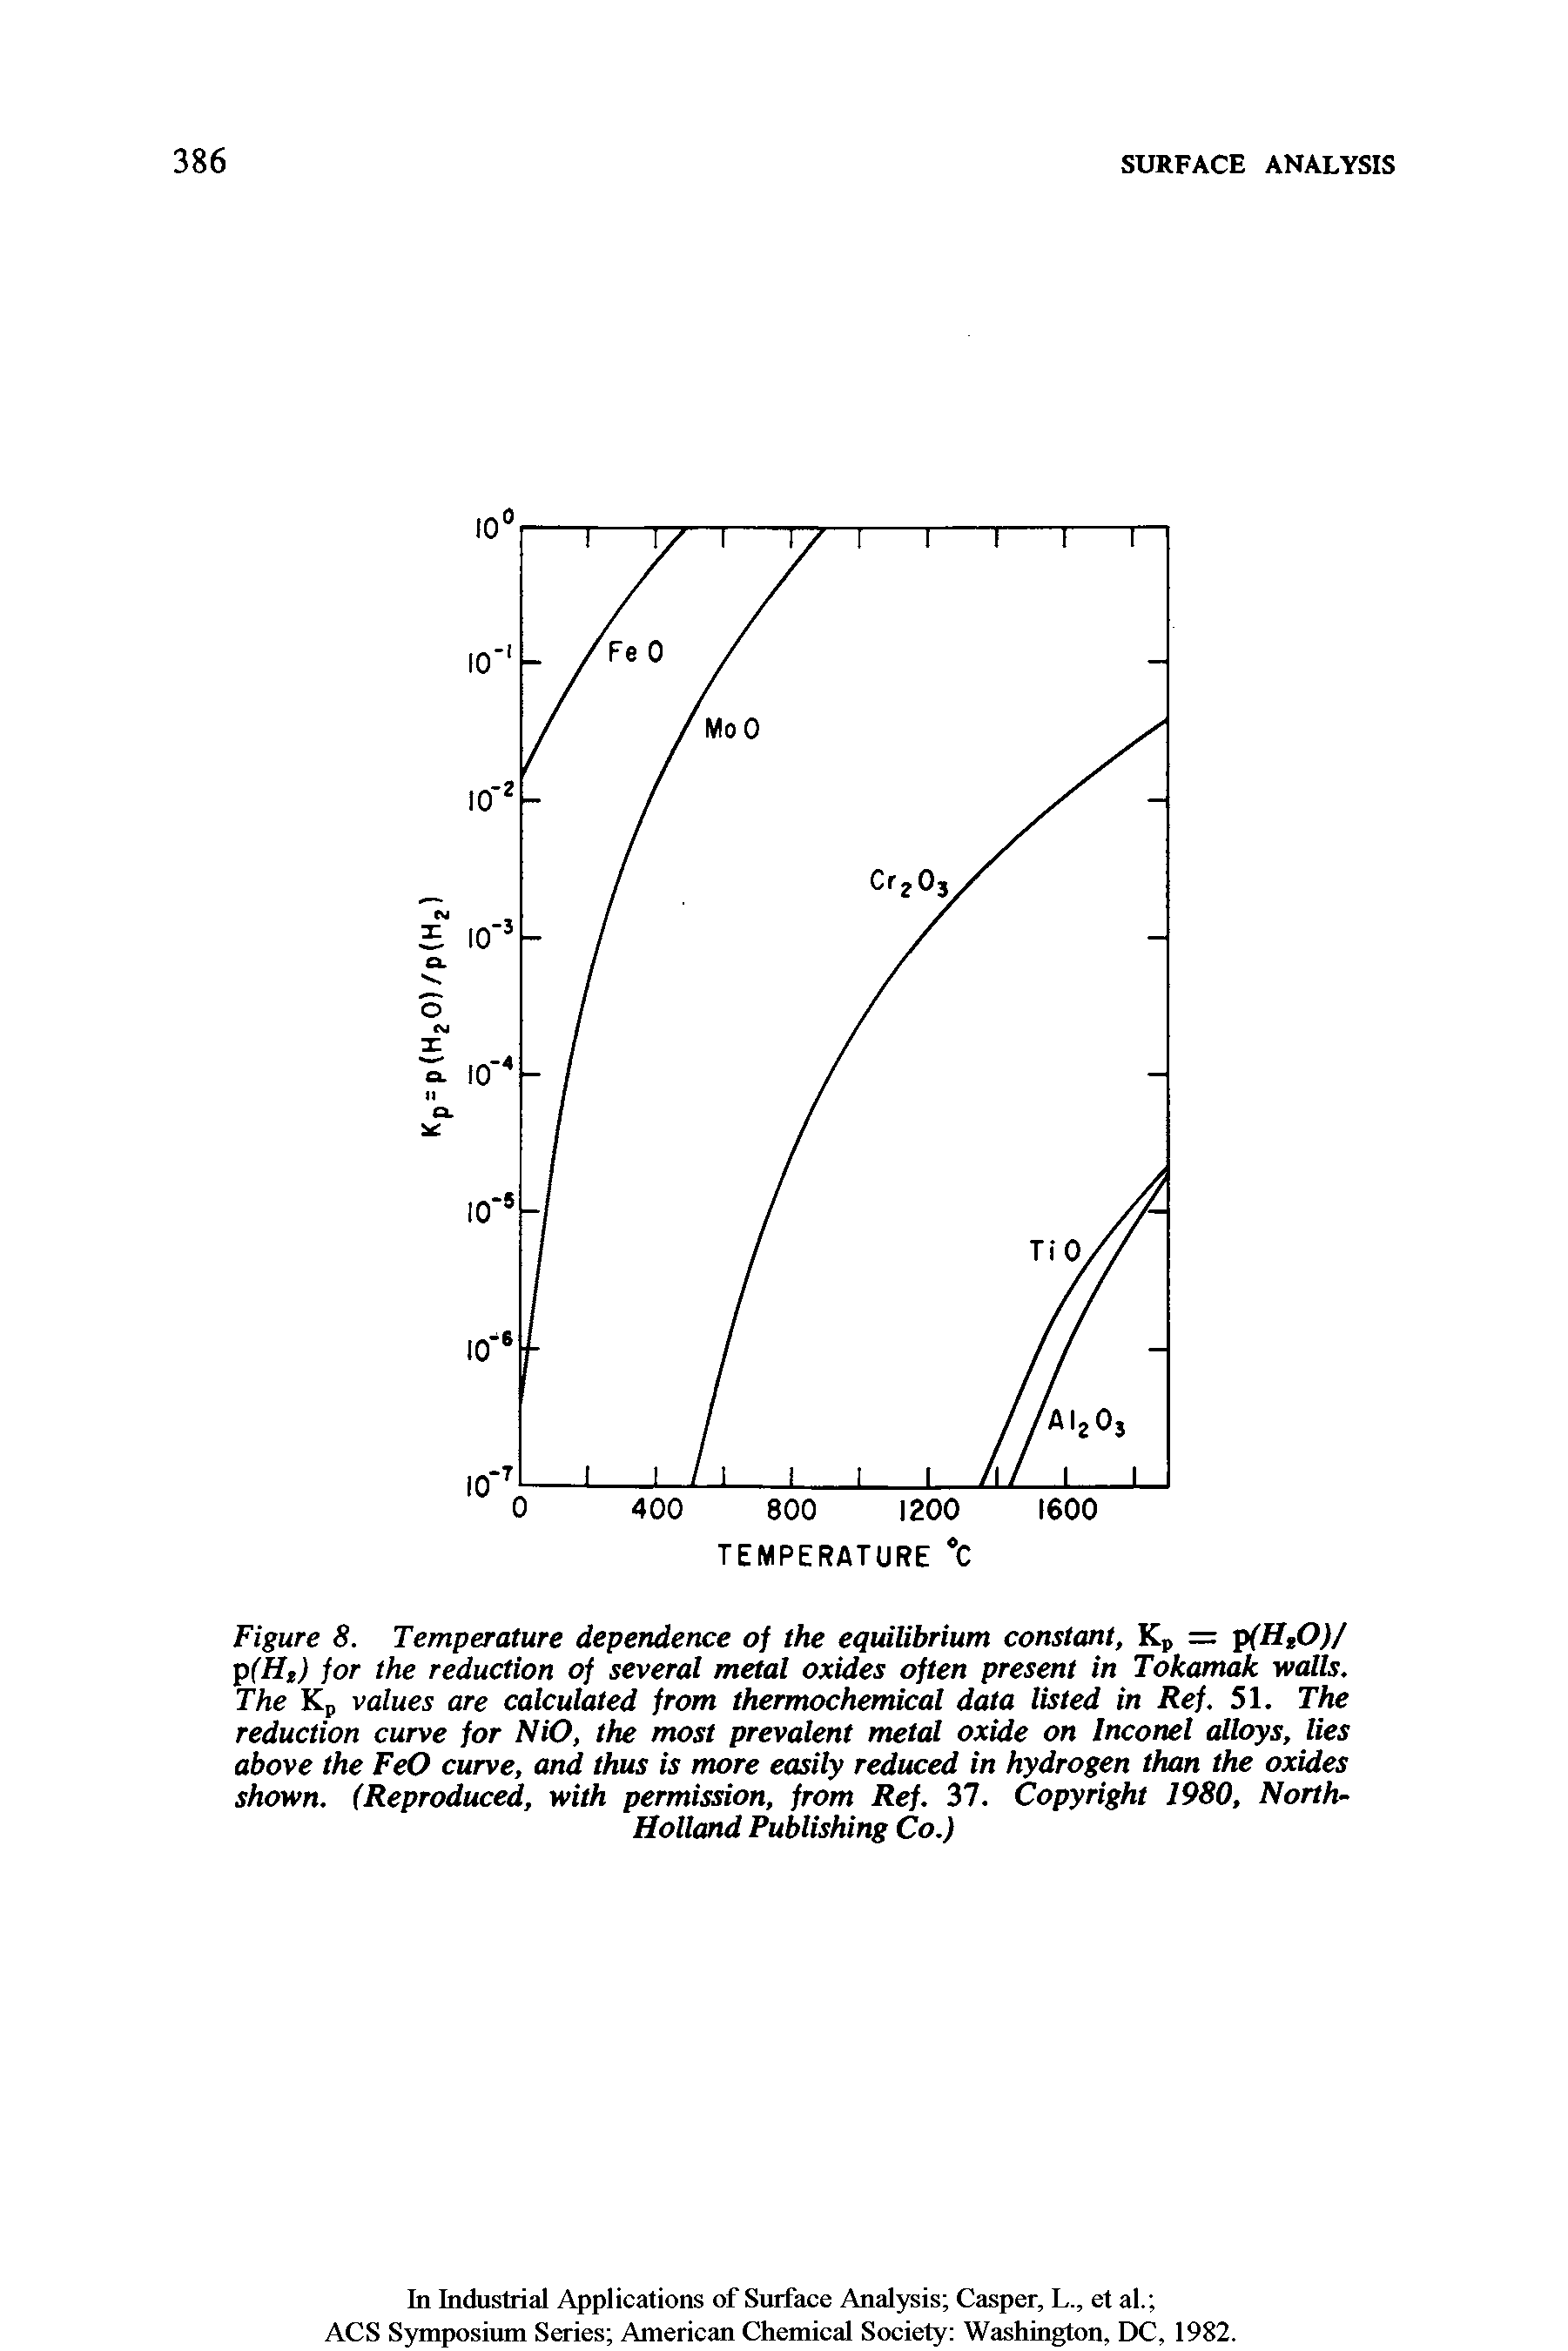 Figure 8. Temperature dependence of the equilibrium constant, Kp = p(HtO)/ p(Ht) for the reduction of several metal oxides often present in Tokamak walls. The Kp values are calculated from thermochemical data listed in Ref. 51. The reduction curve for NiO, the most prevalent metal oxide on Inconel alloys, lies above the FeO curve, and thus is more easily reduced in hydrogen than the oxides shown. (Reproduced, with permission, from Ref. 37. Copyright 1980, North-...